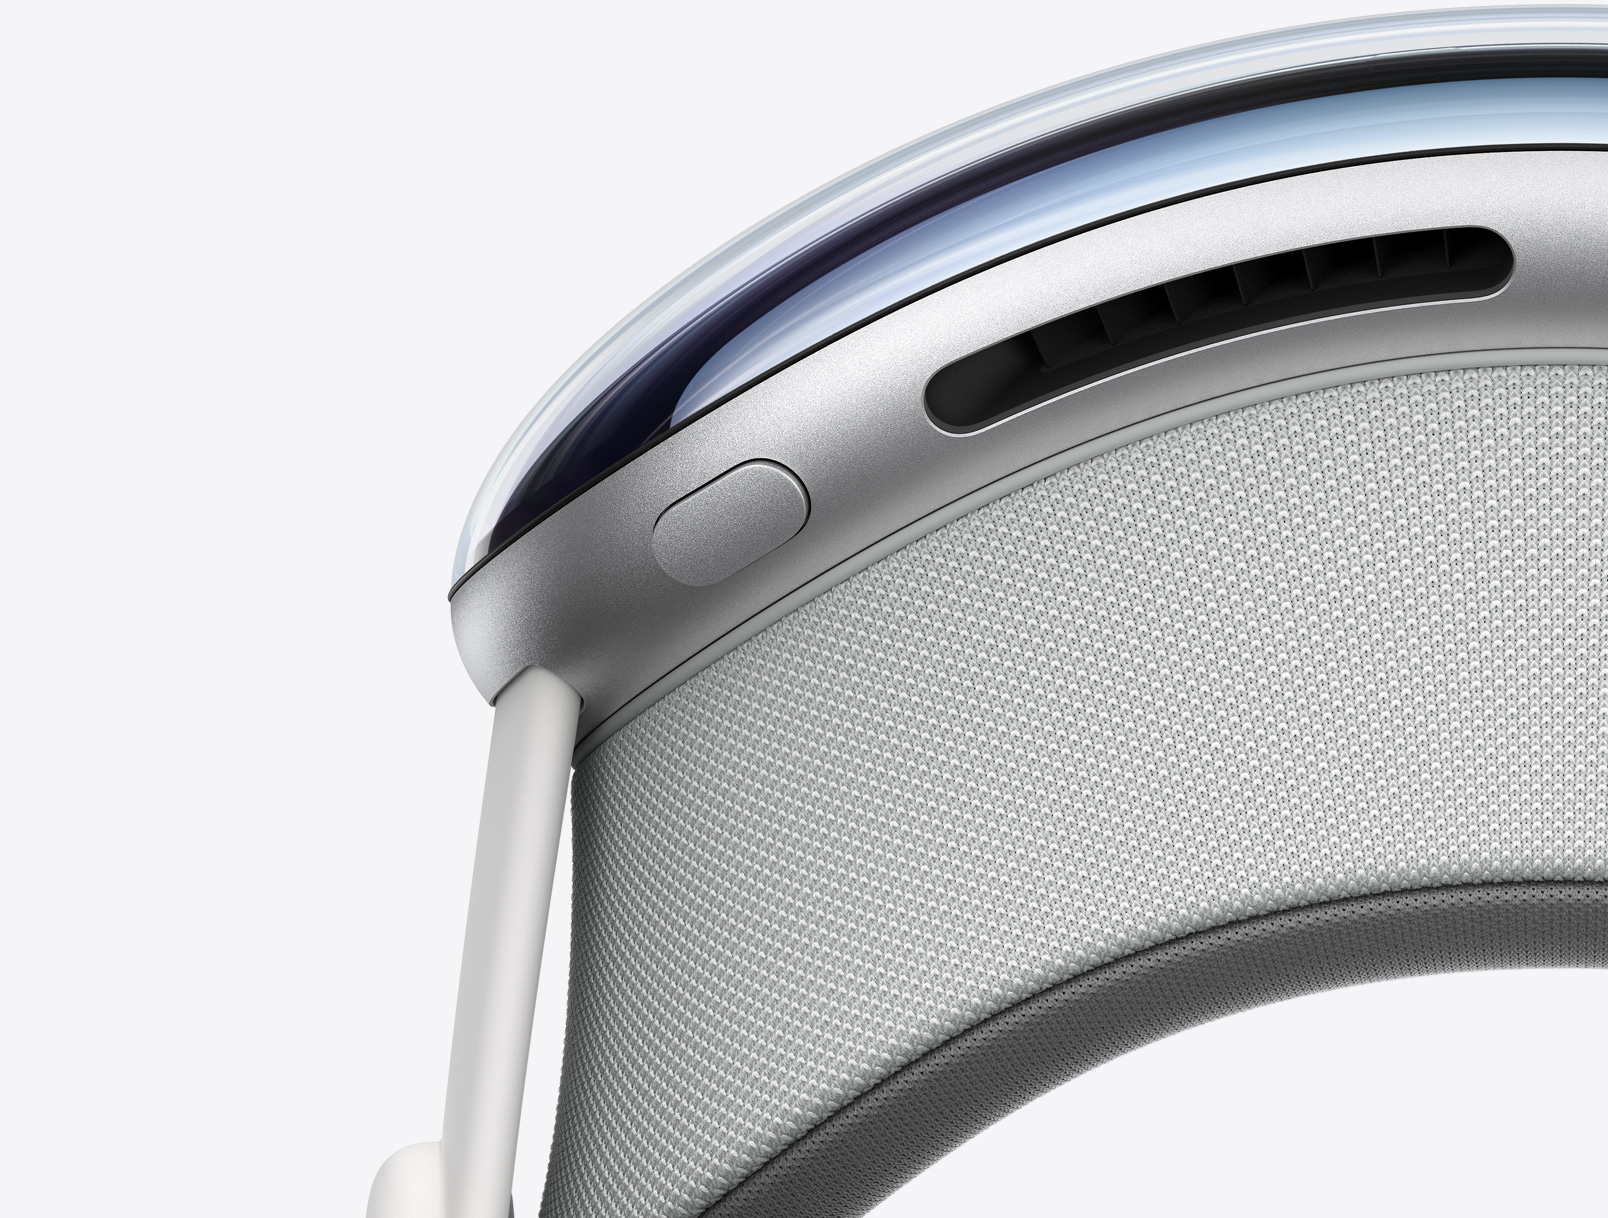 Vertical side view of Apple Vision Pro showing top button